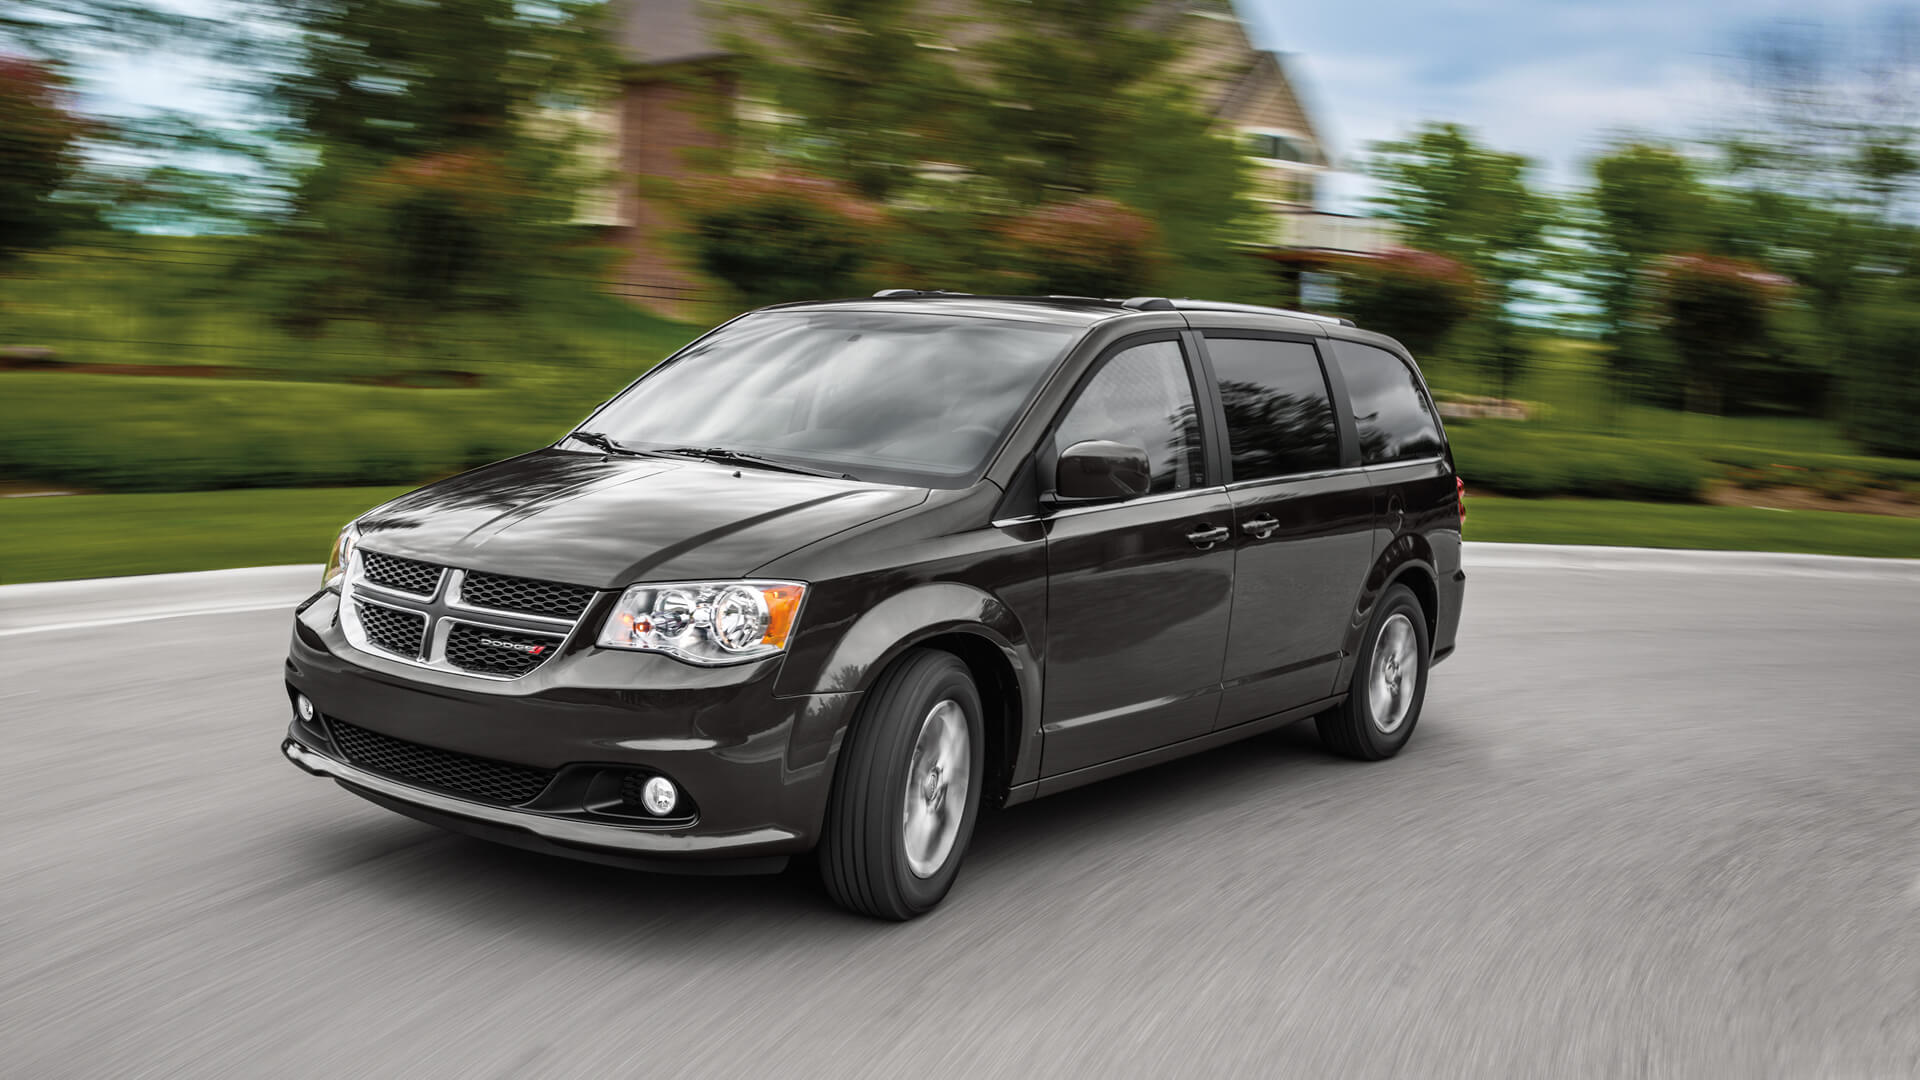 <ul> <li><strong>10-year cost to maintain:</strong> $14,500</li> </ul> <p>The modern minivan can be traced to 1983 with the release of the first Dodge Caravan. In 1987, the Grand Caravan, which had a longer wheelbase, joined the original. In 2007, Dodge dropped the original Caravan, leaving the Grand Caravan all alone in the Dodge minivan universe.</p> <p>If you're in the market for the iconic family van, prepare to spend far more than the $10,600 10-year maintenance fees associated with the average Dodge vehicle.</p>